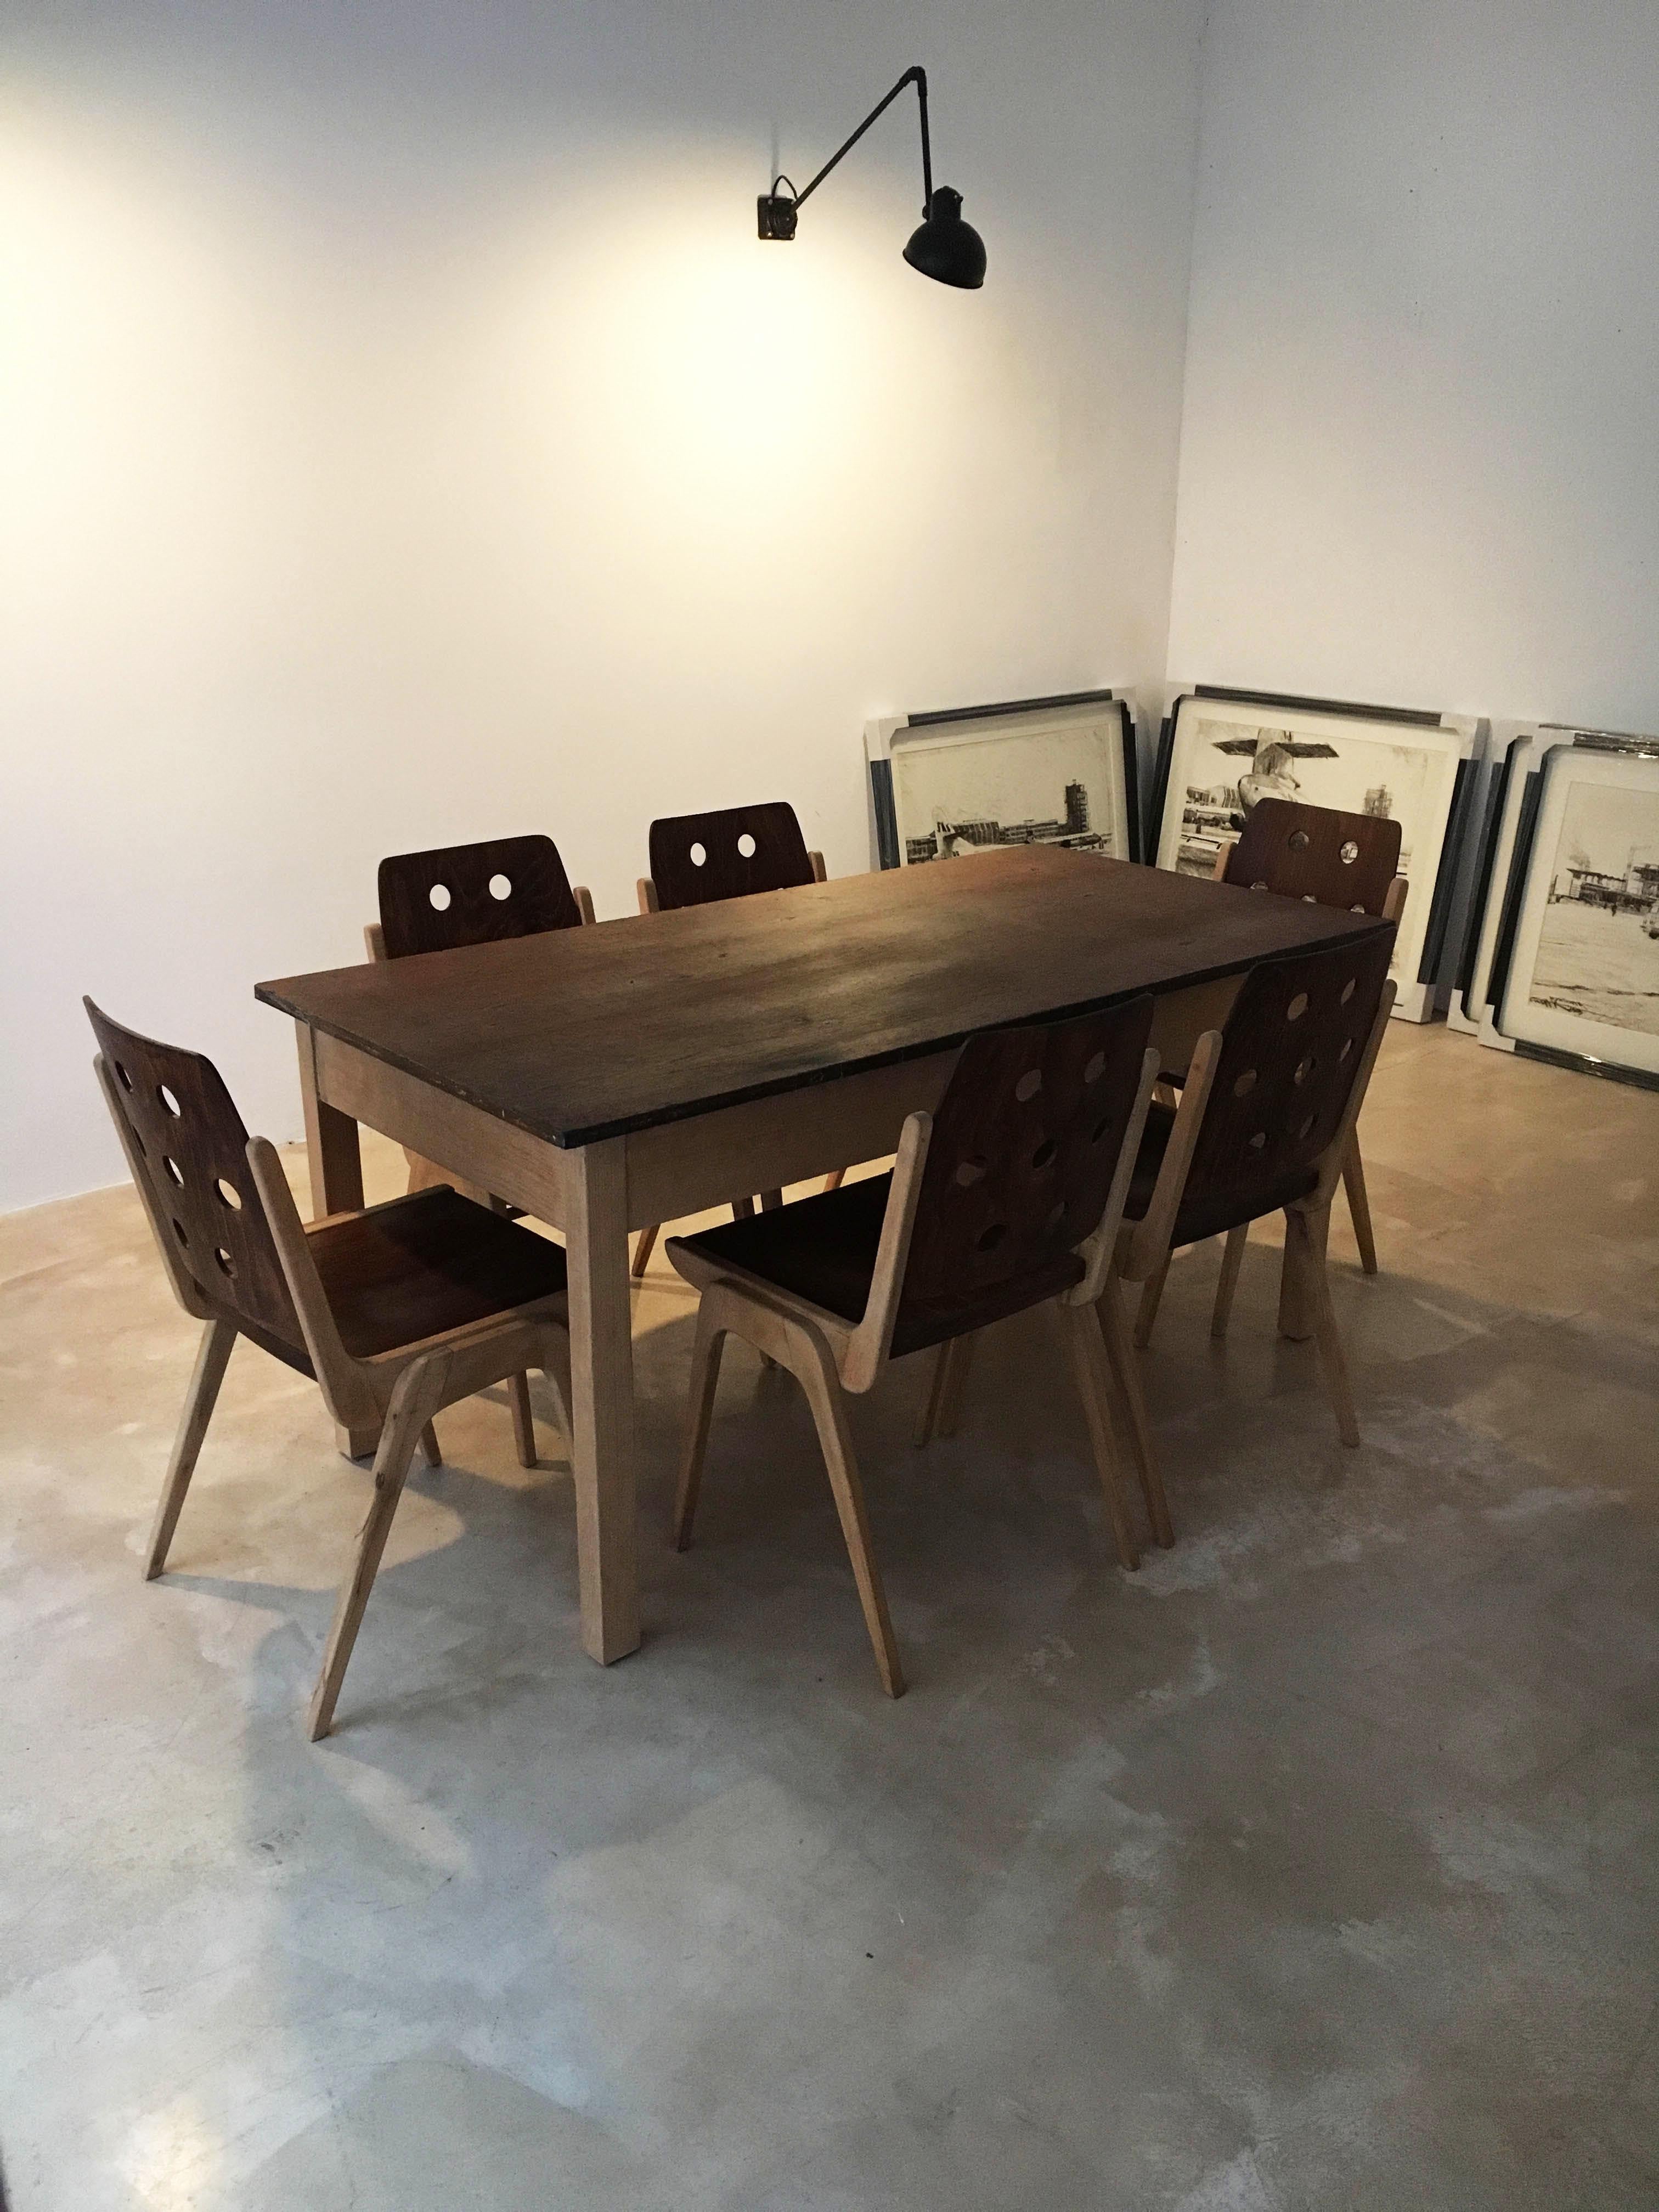 Up to 15 Franz Schuster stacking dining chairs, Model 'Maestro' Austria 1950s. Similar to the more famous Roland Rainer Stadthallen Chair, the Franz Schuster's design for a stacking chair is equally elegant, modern and timeless. The chairs provide a